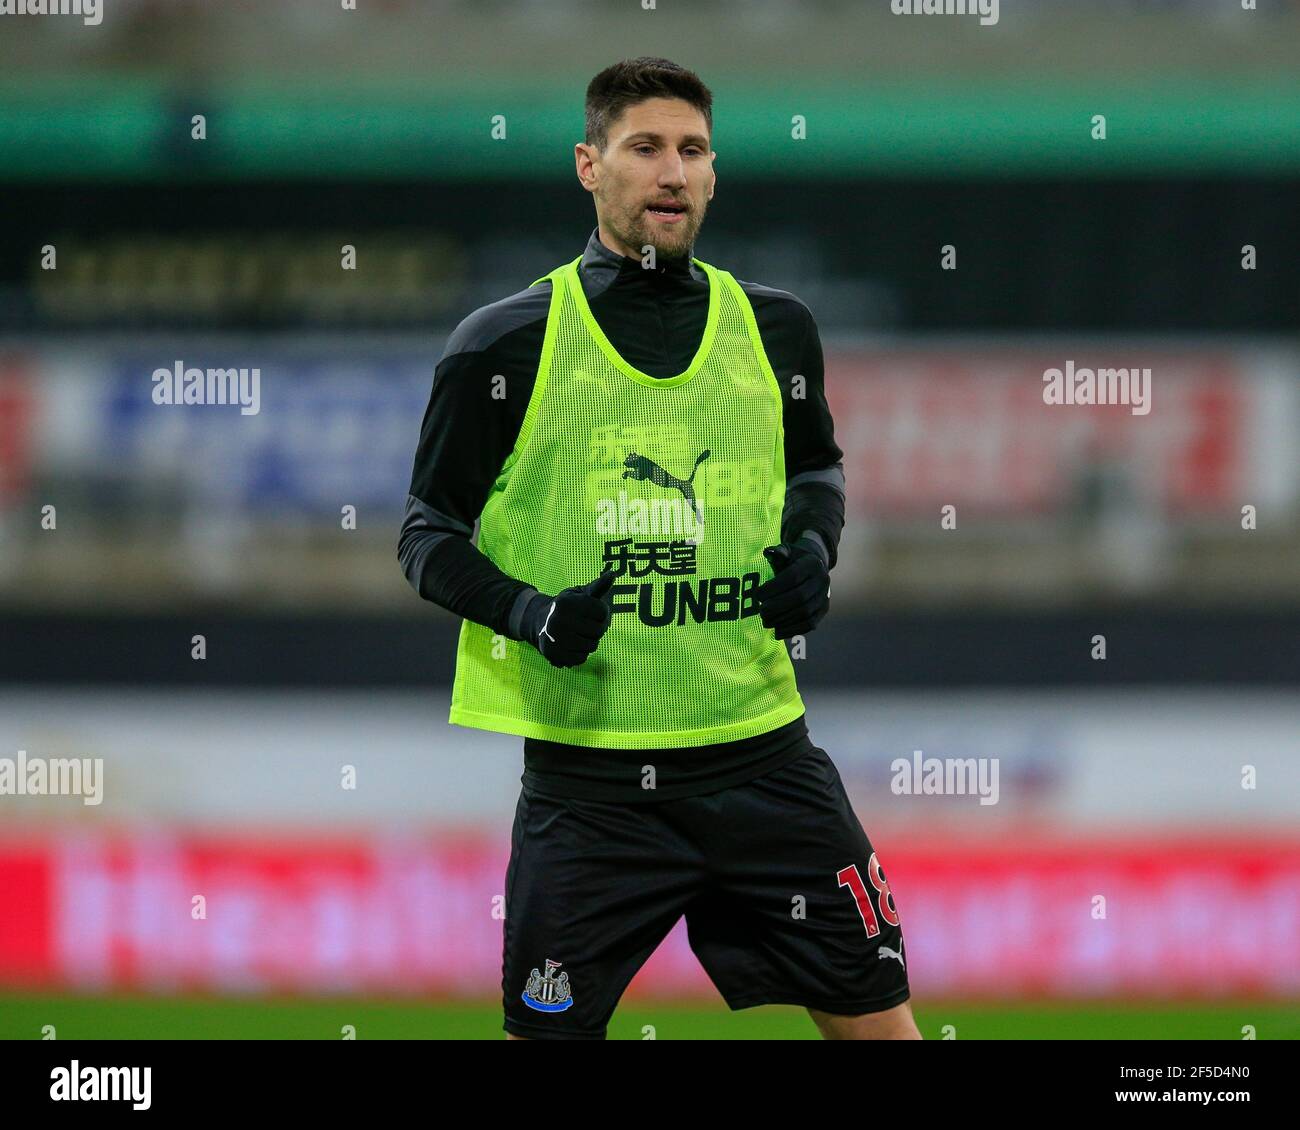 Federico Fernández #18 of Newcastle United during the pre-game warmup Stock Photo